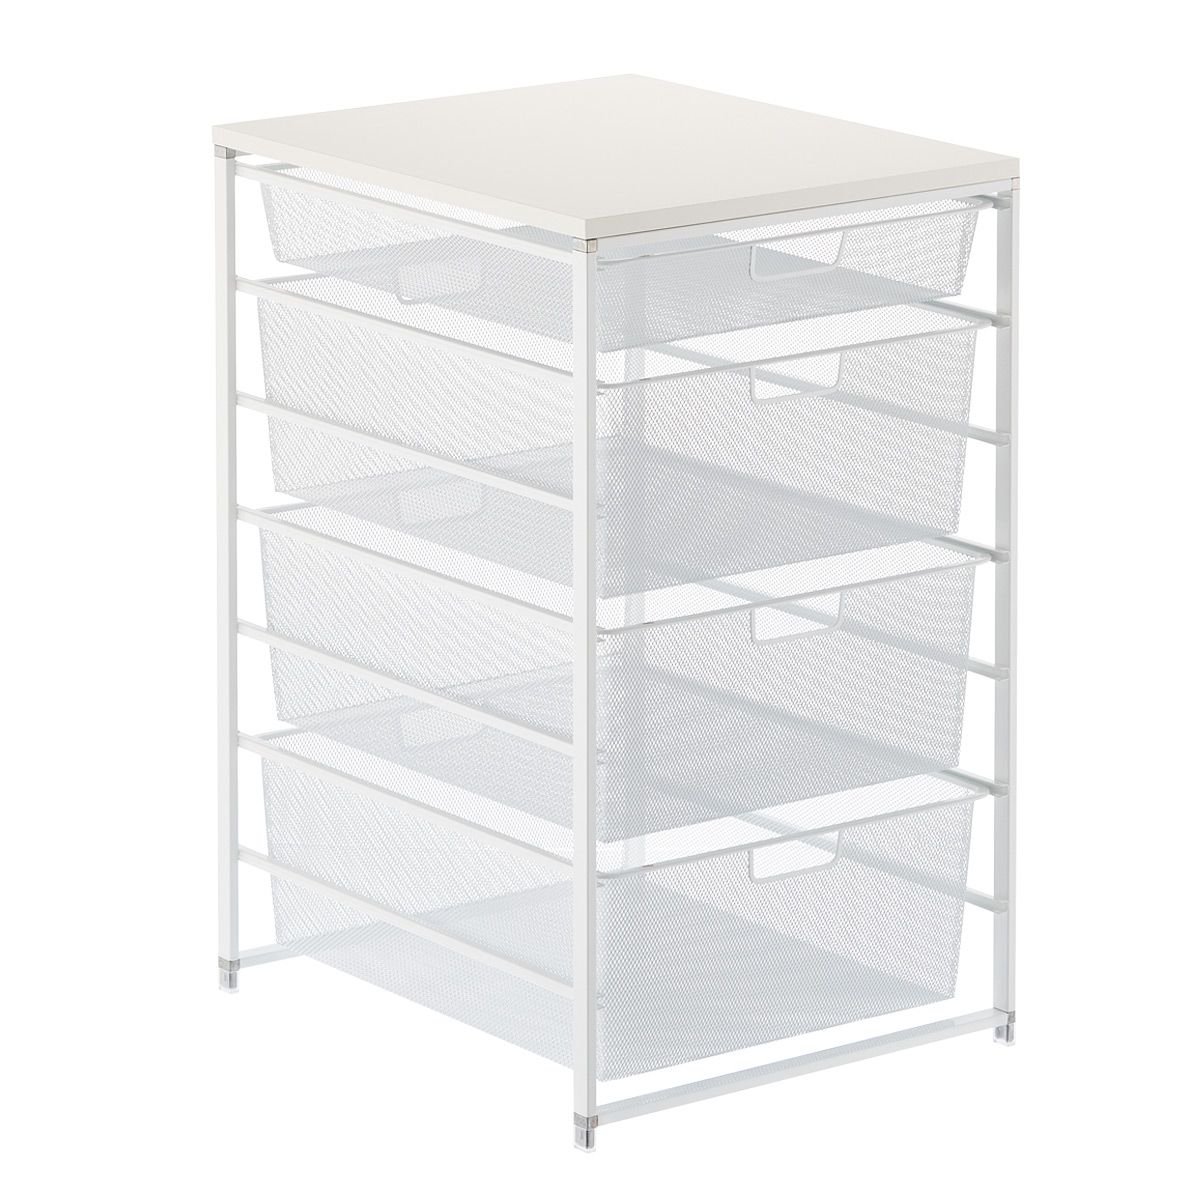 Mesh Closet Drawers | The Container Store